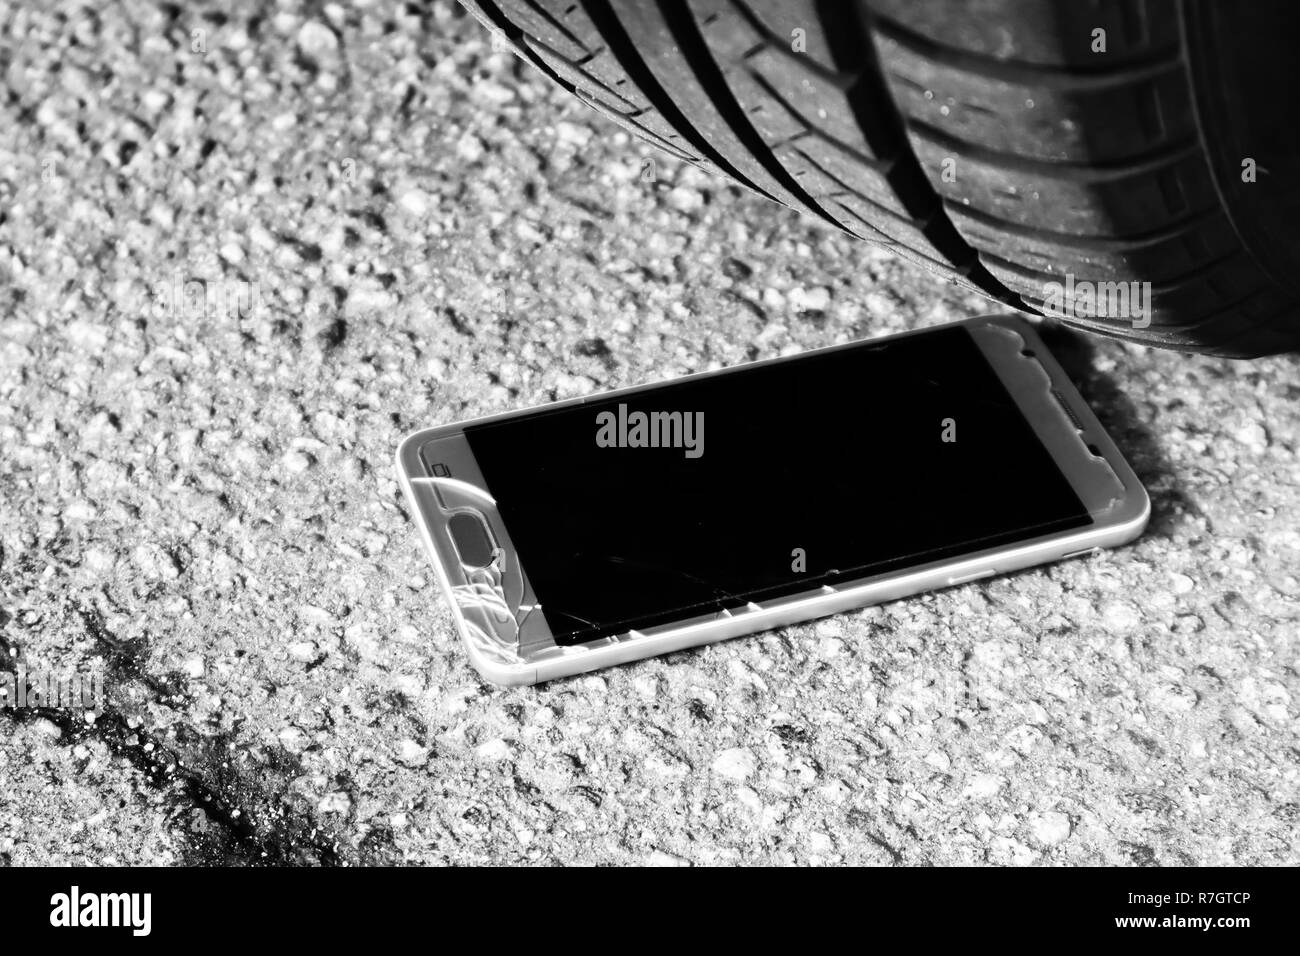 Modern smart phone with cracked screen glass on the asphalt under the car wheel Stock Photo